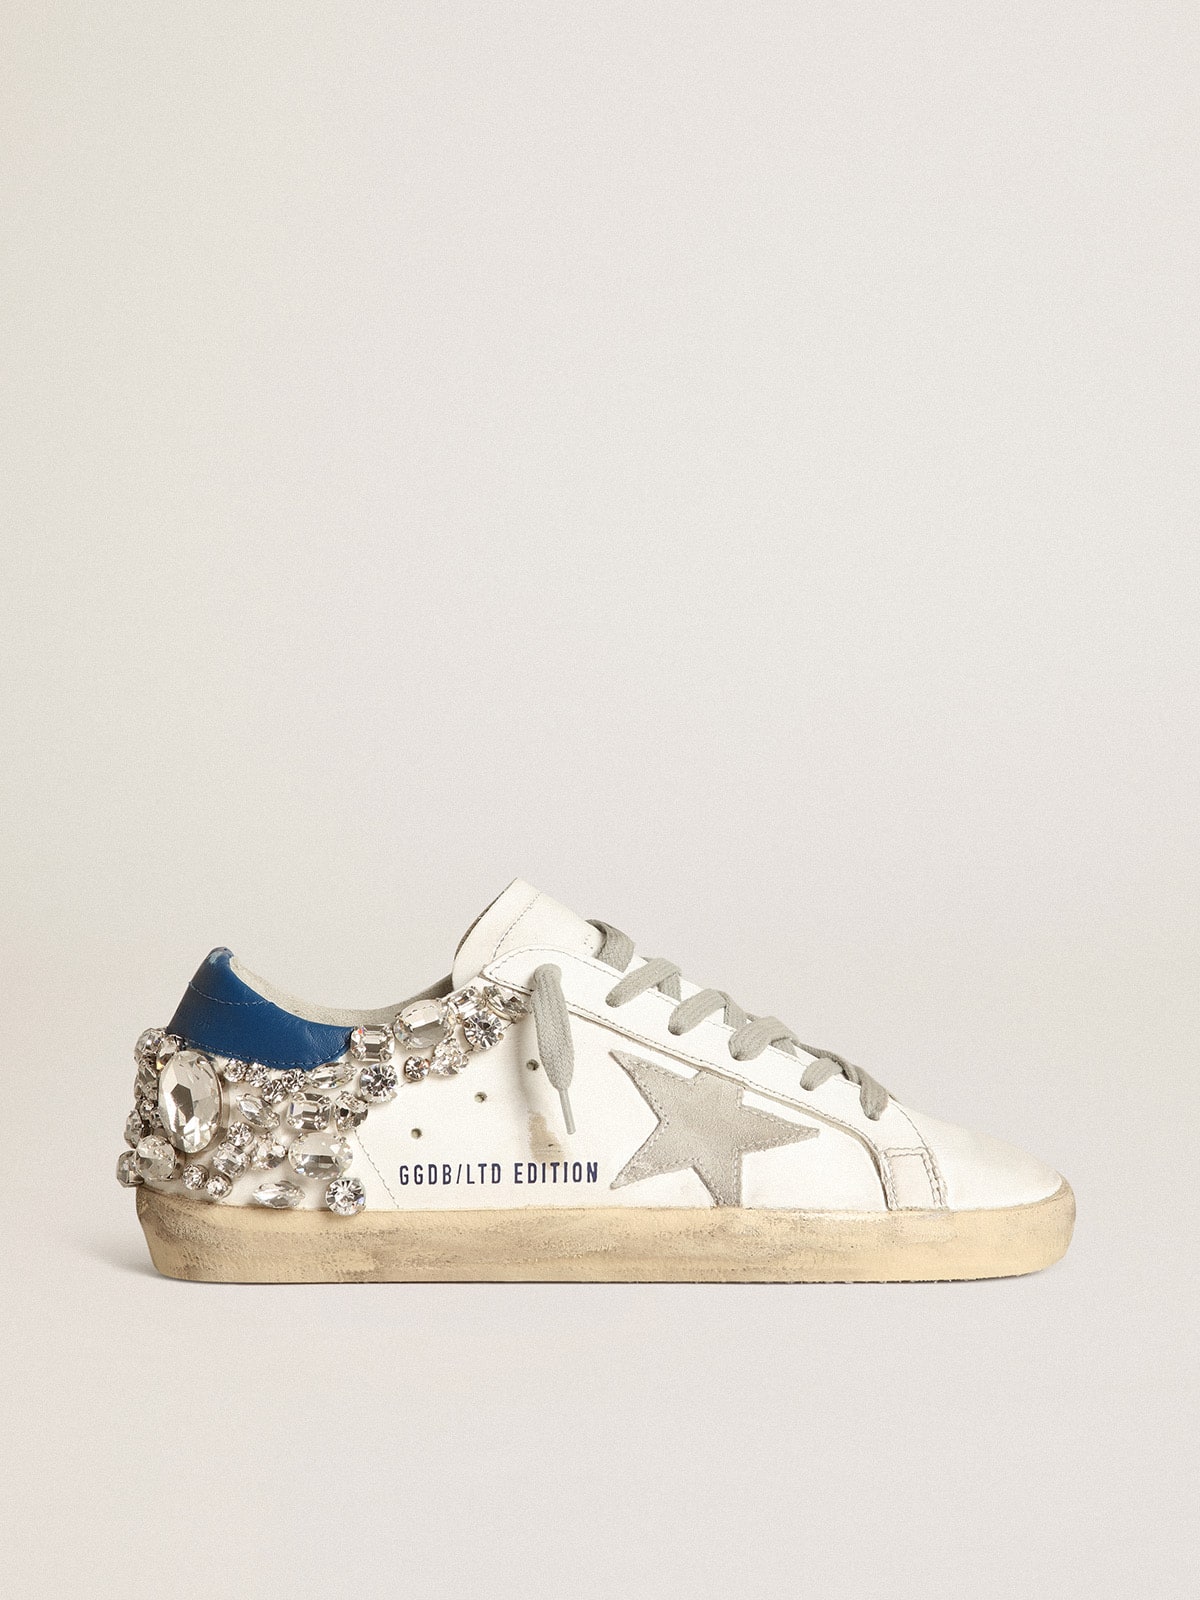 Glitter sneakers, sparkly apparel and accessories | Golden Goose